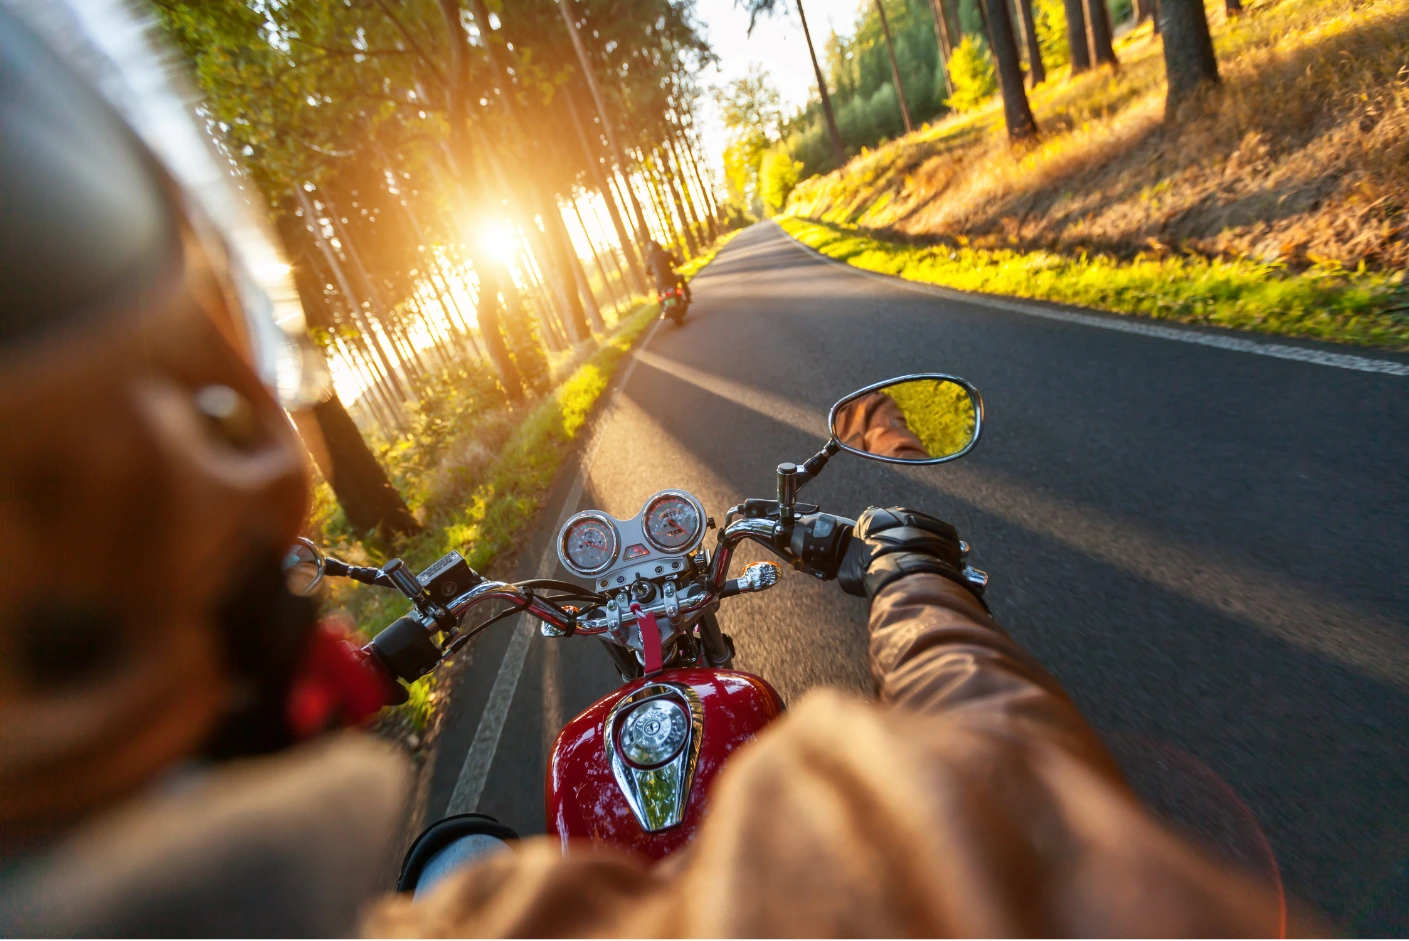 Here is a Study guide of motorcycle learners test in Queensland